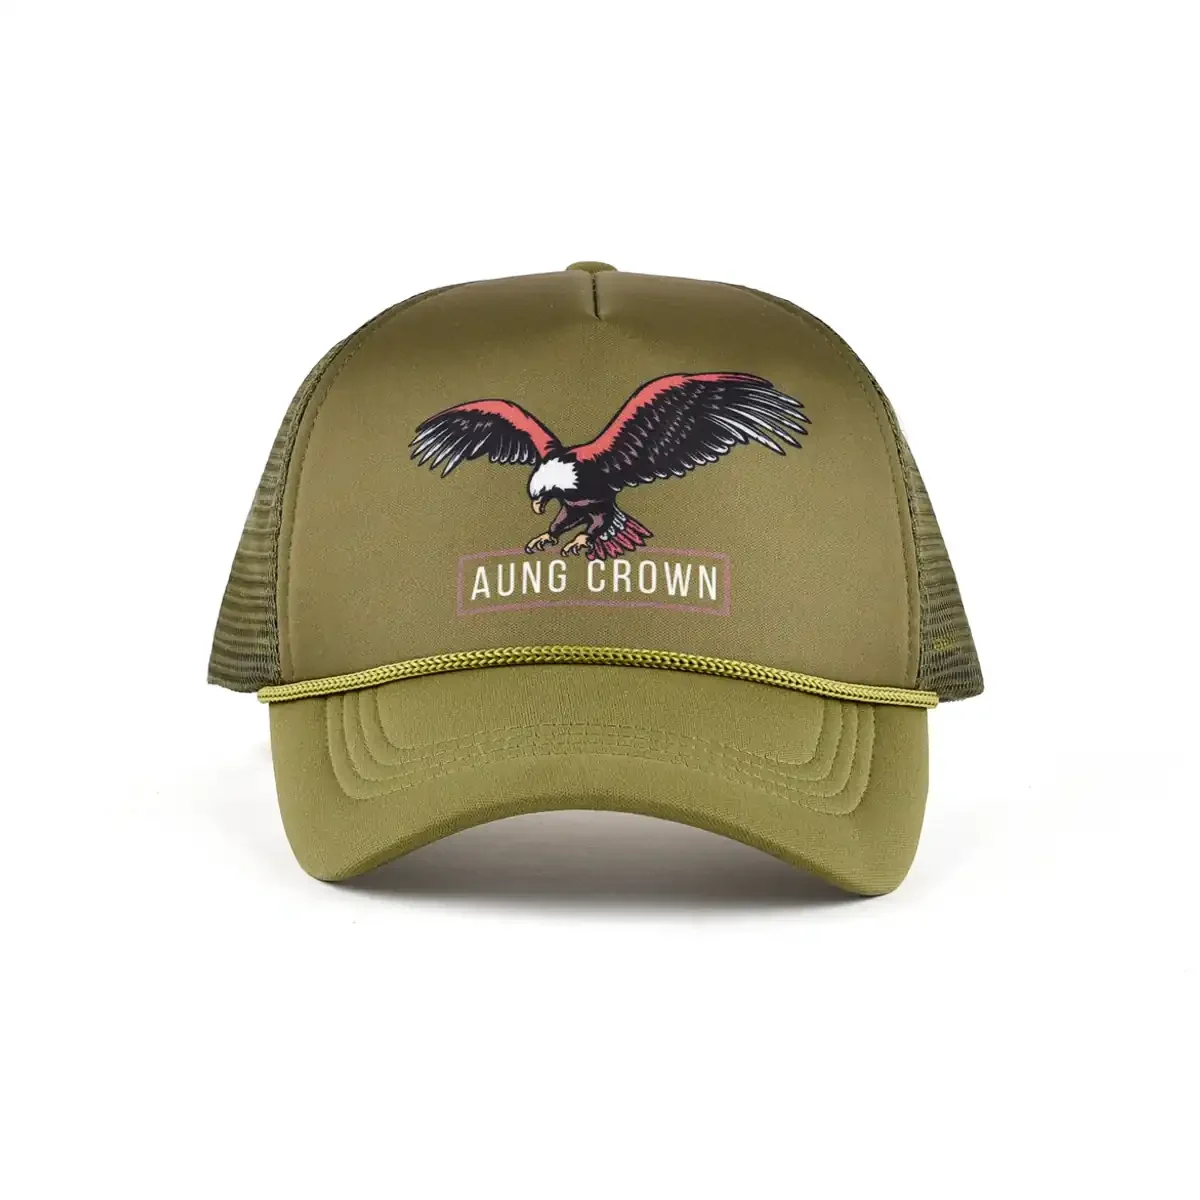 Aung-Crown-mens-green-trucker-hat-for-outdoors-with-a-curved-brim-AC201024-80